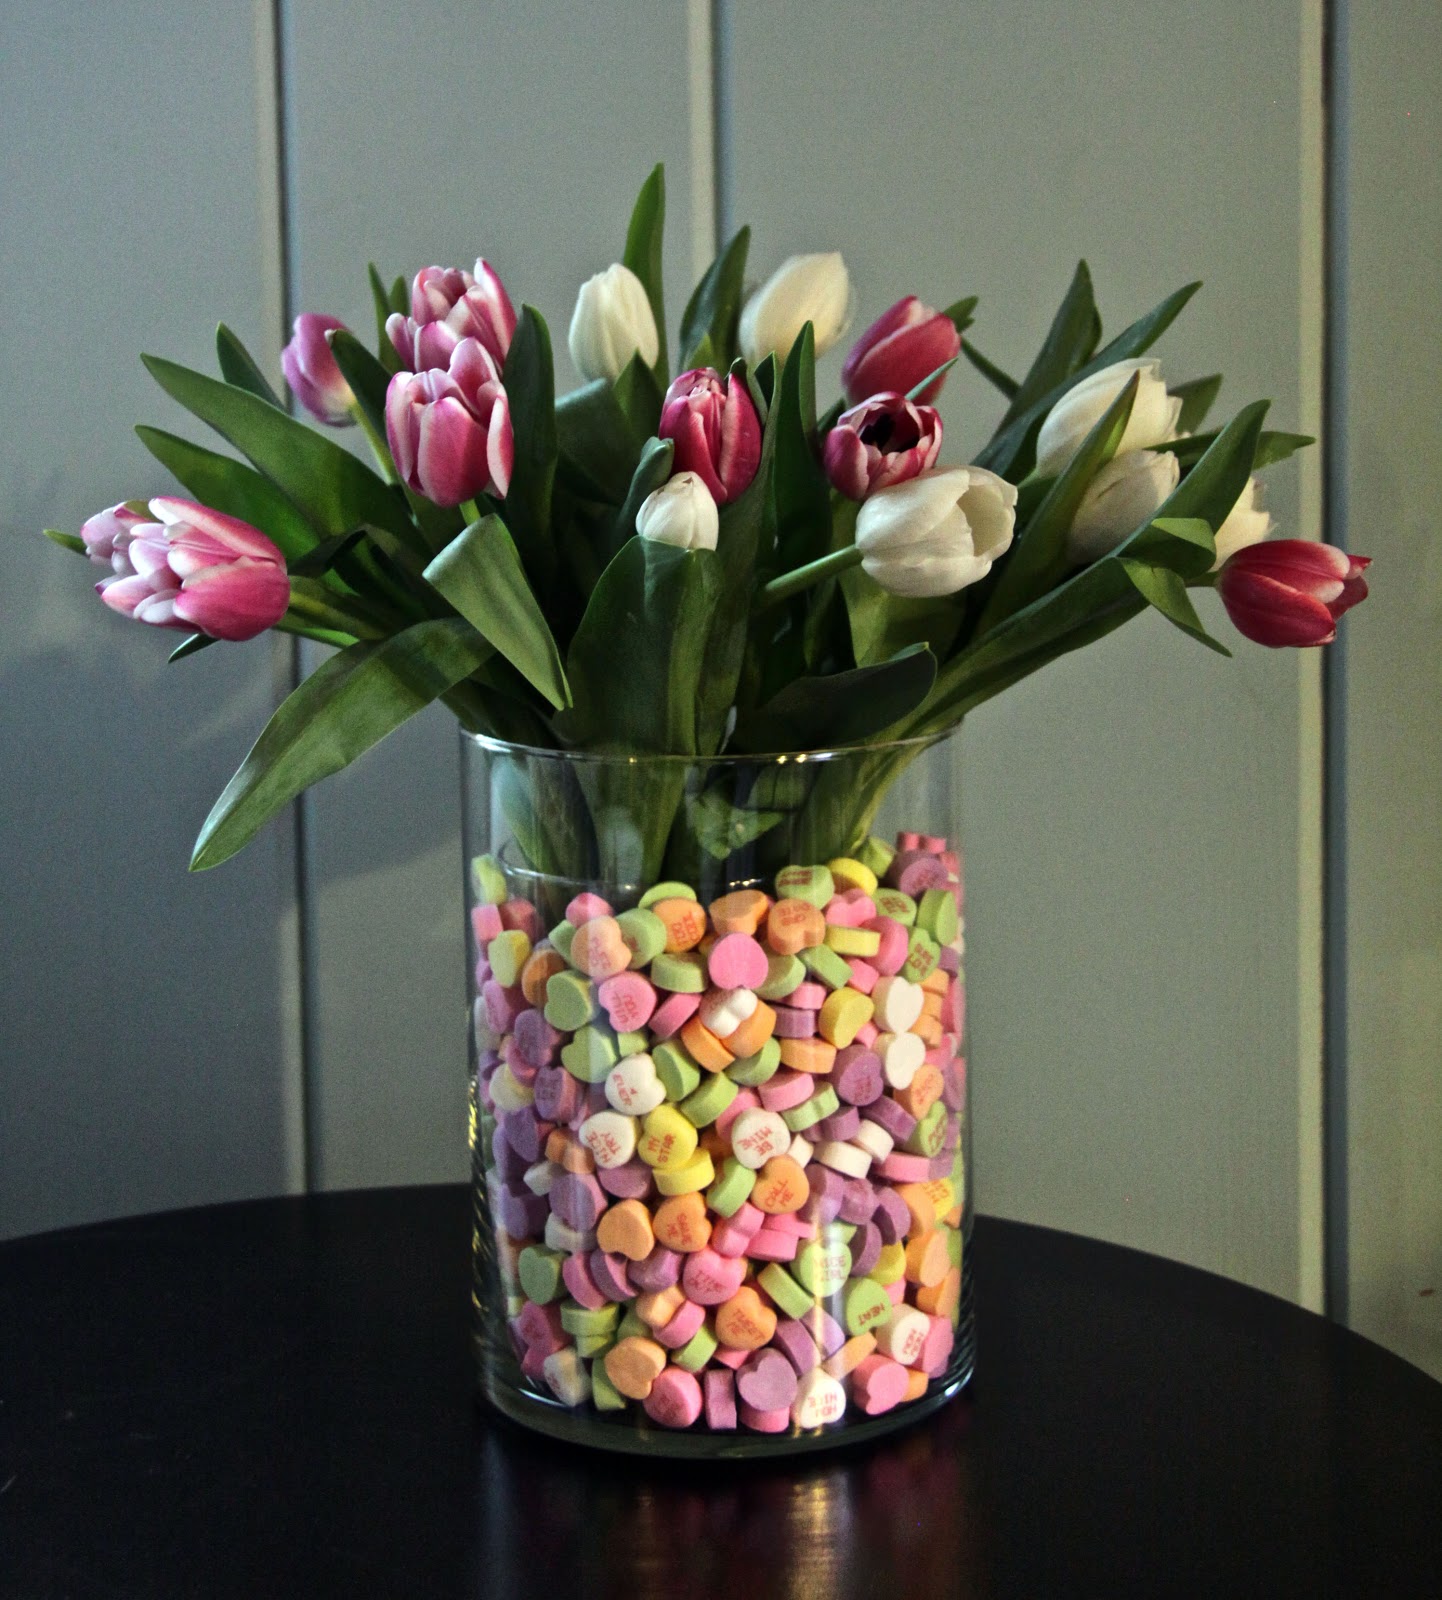 Fireflies and Jellybeans: Love Tulips